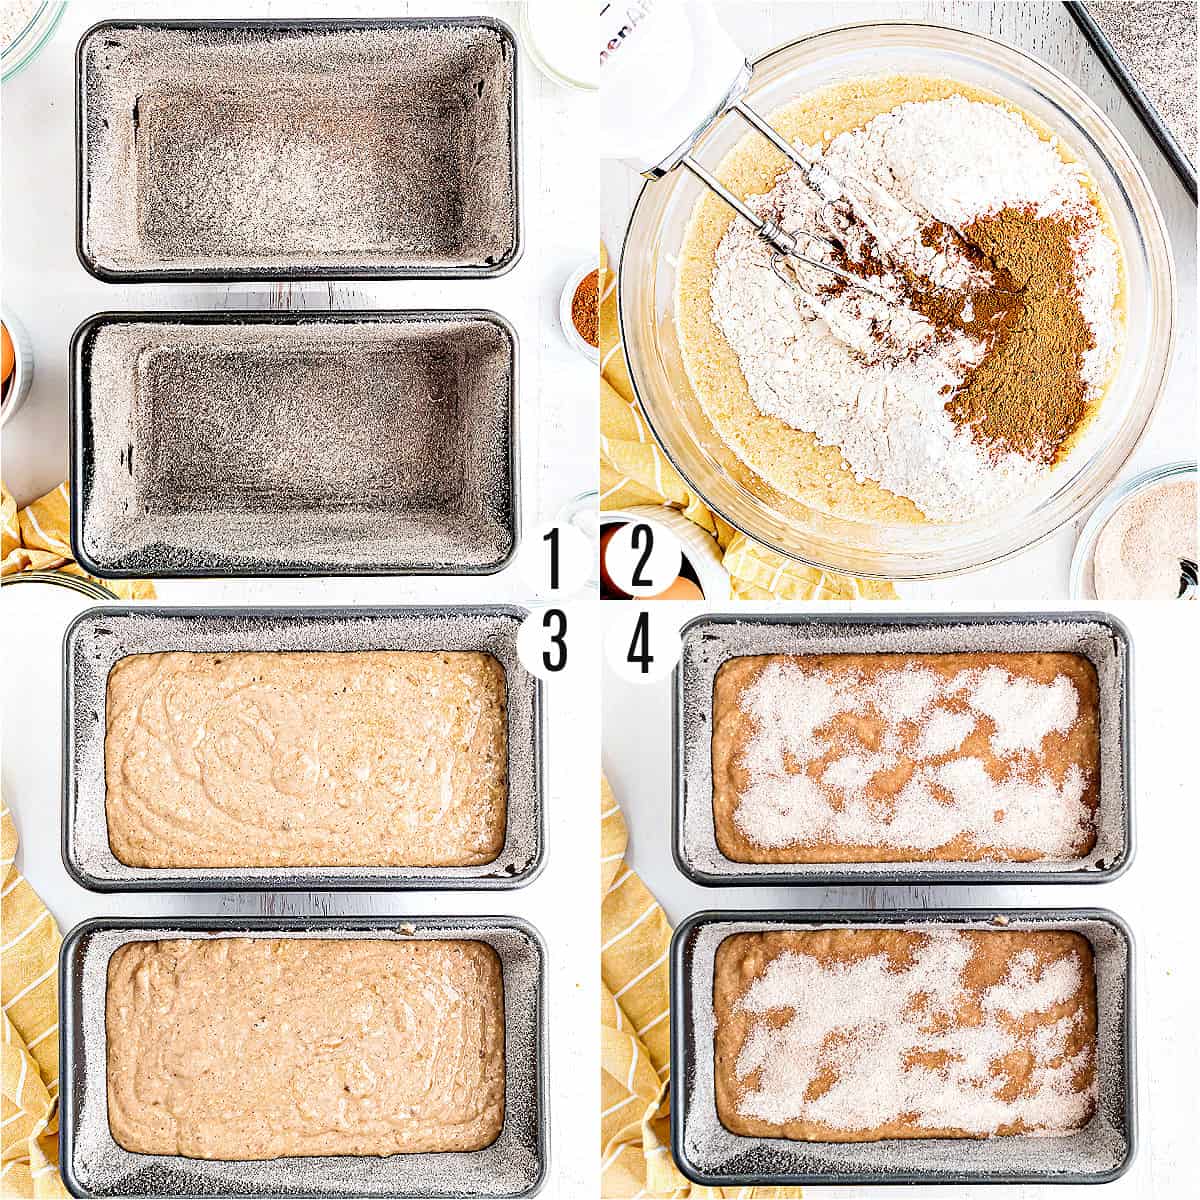 Step by step photos showing how to make snickerdoodle banana bread.